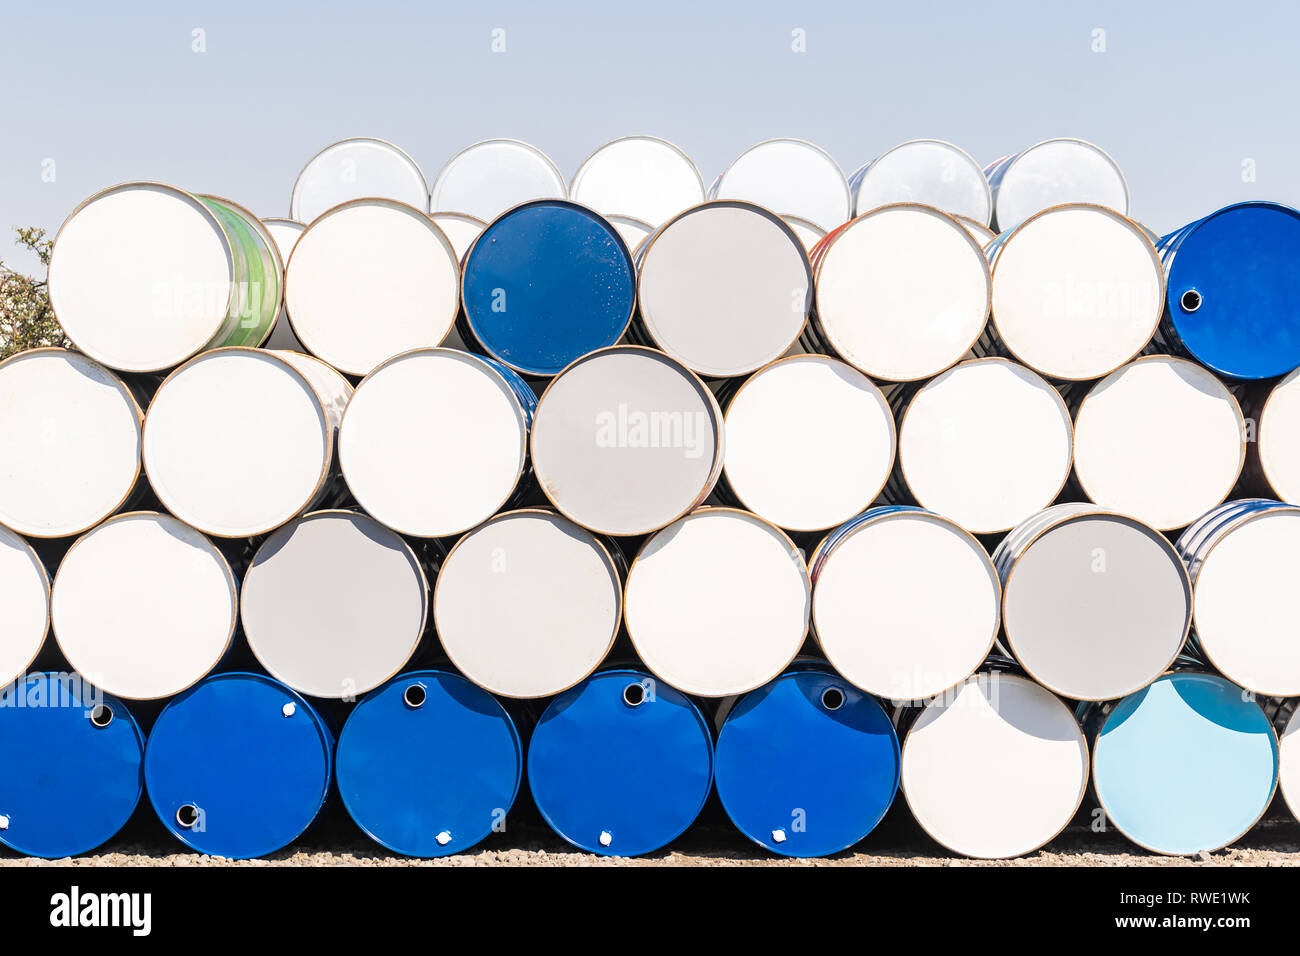 Industry oil chemical metal barrels stacked up in waste yard of tank and container, Kawasaki city near Tokyo Japan Stock Photo